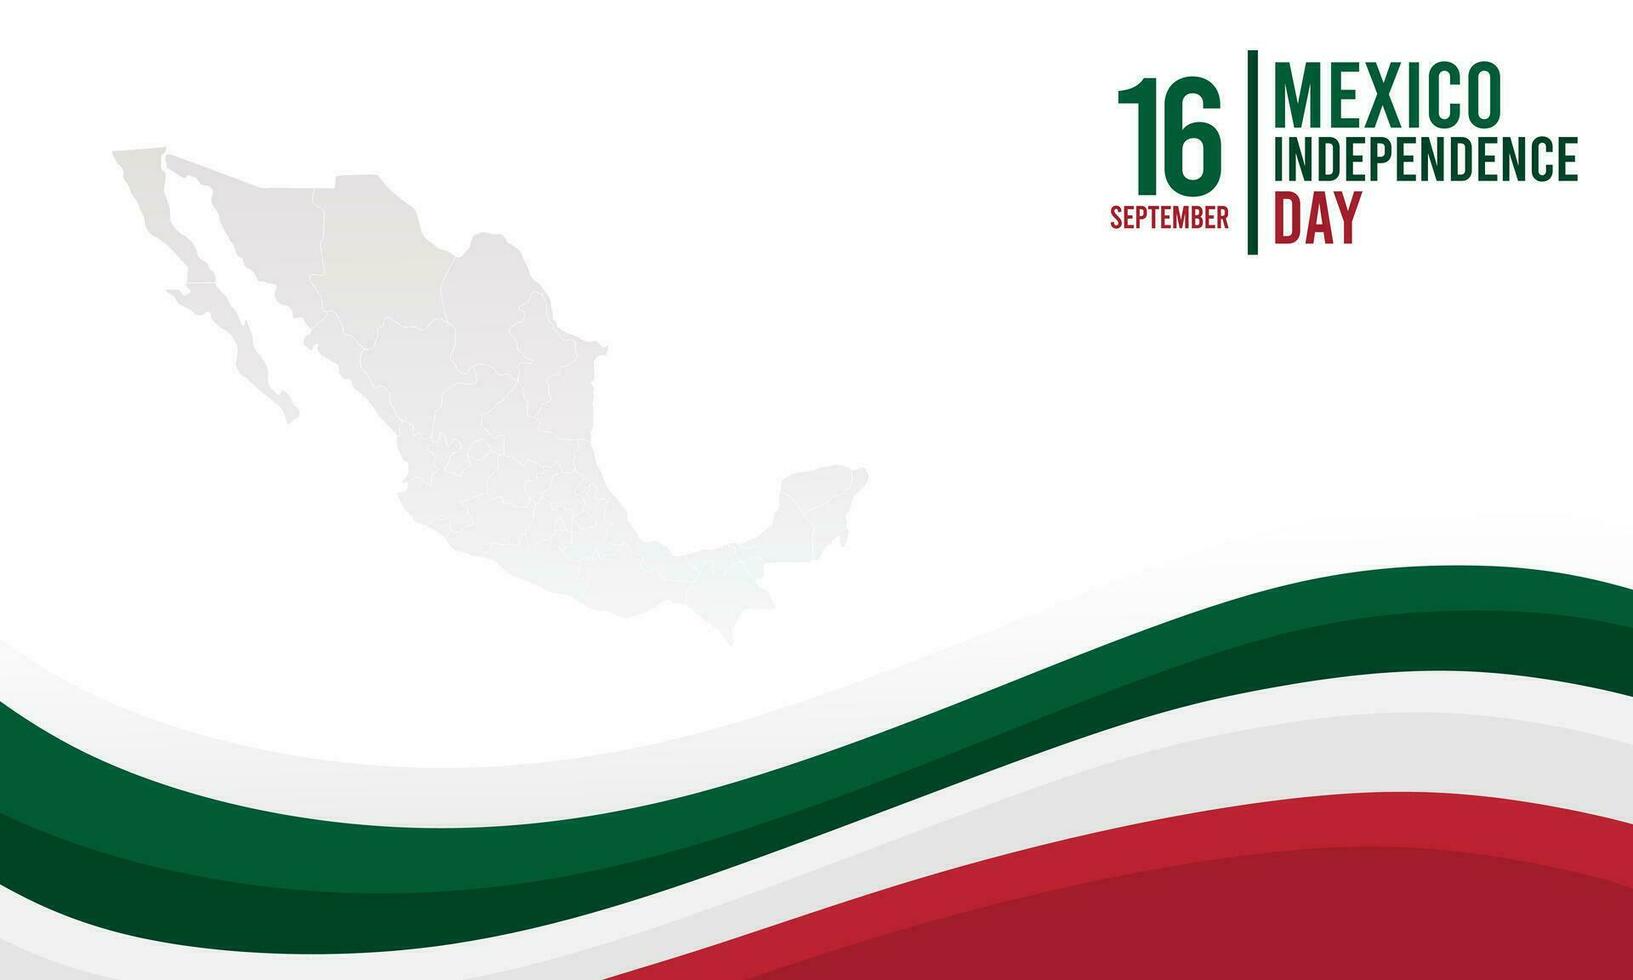 Mexico independence day vector background